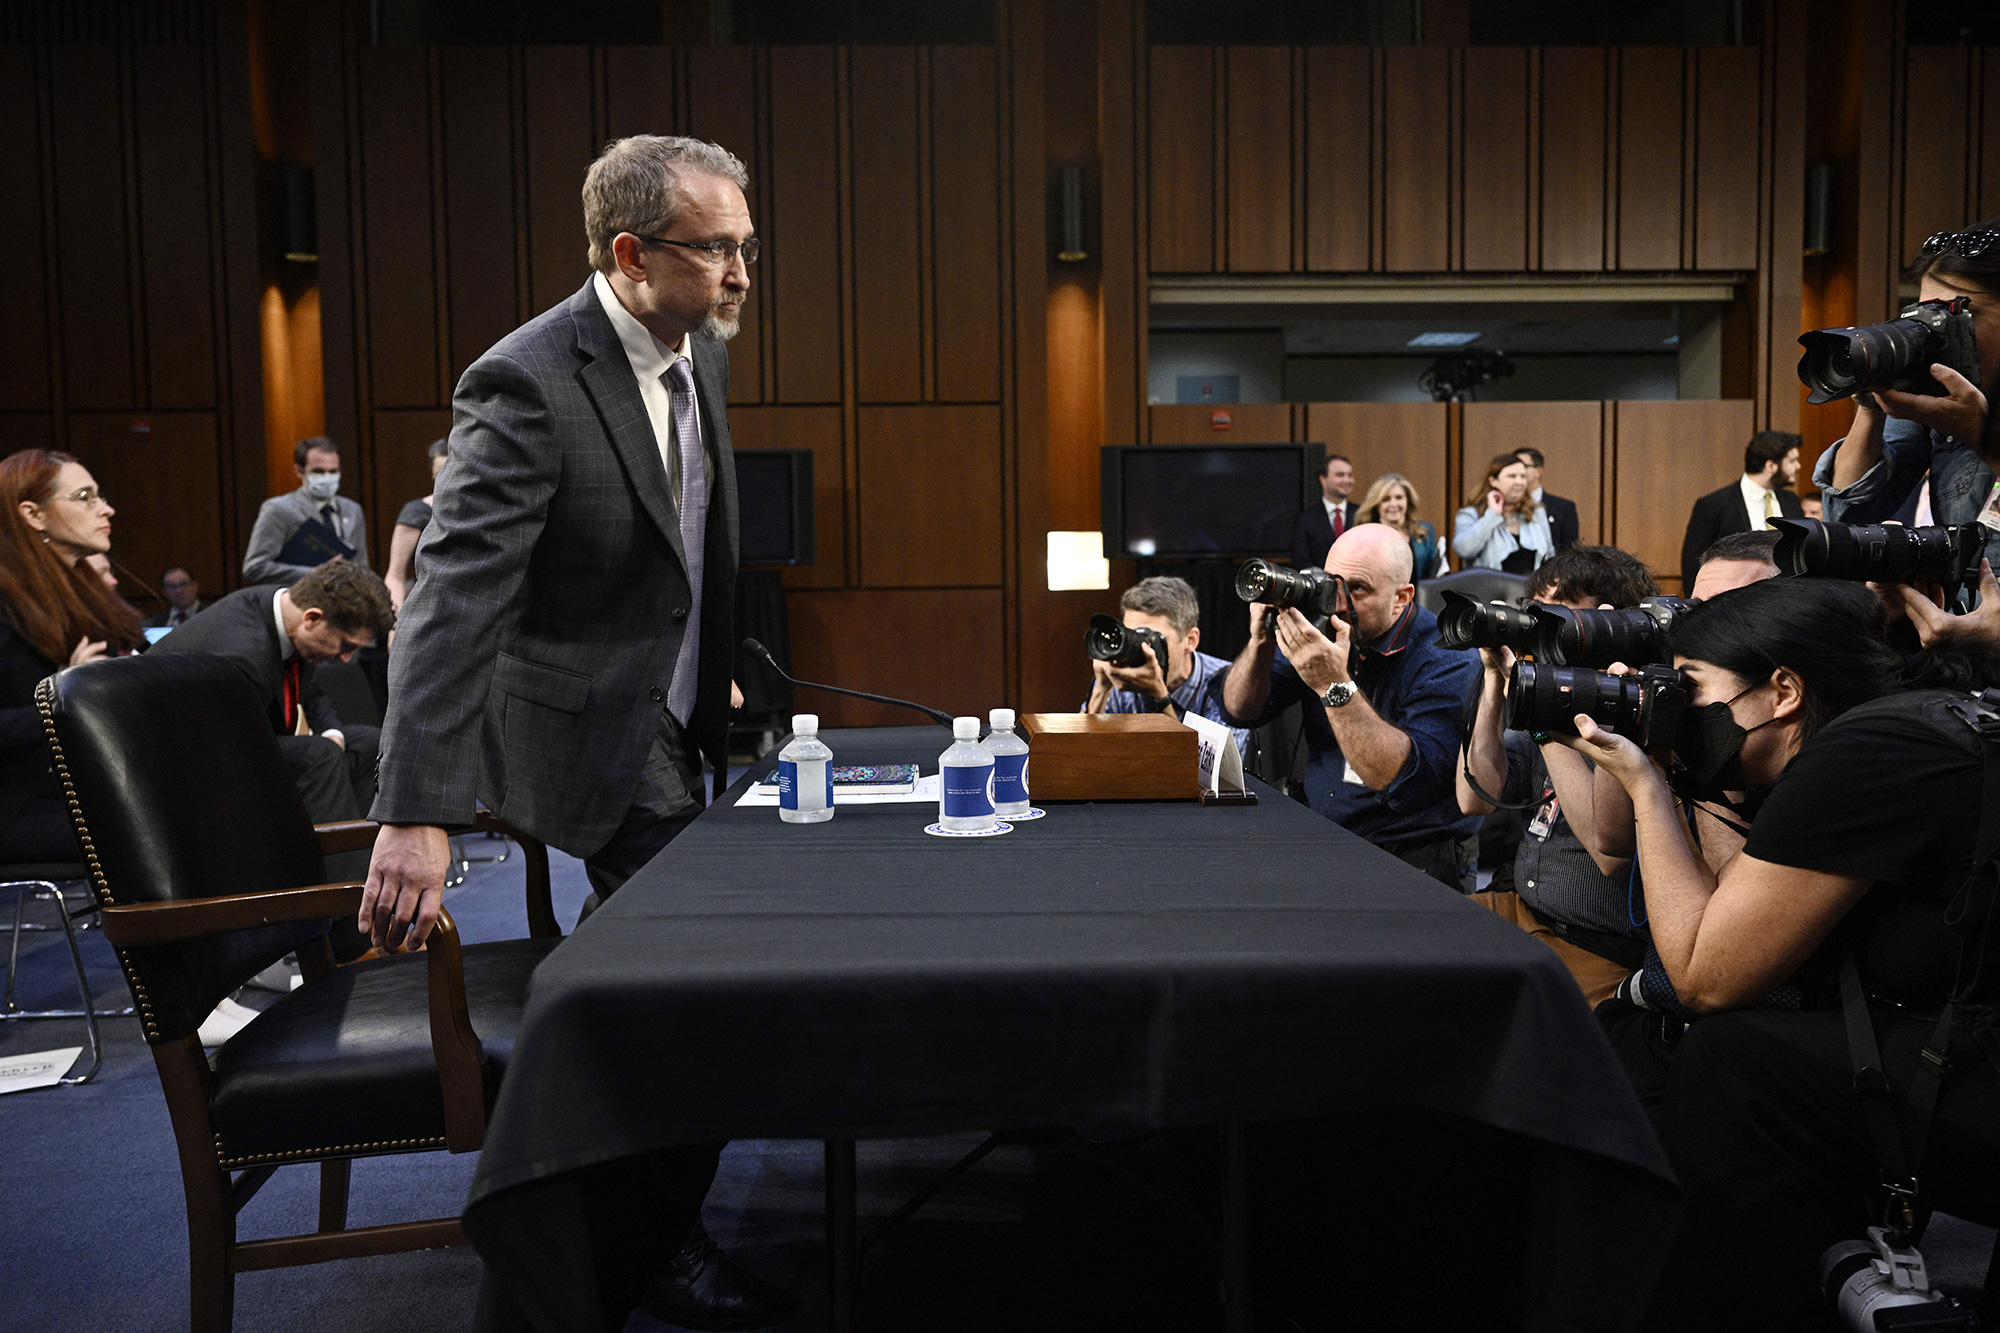 Independent Security Consultant and Twitter Whistleblower Peiter "Mudge" Zatko sits to testify before the US Senate Judiciary Committee on Capitol Hill in Washington, on September 13.